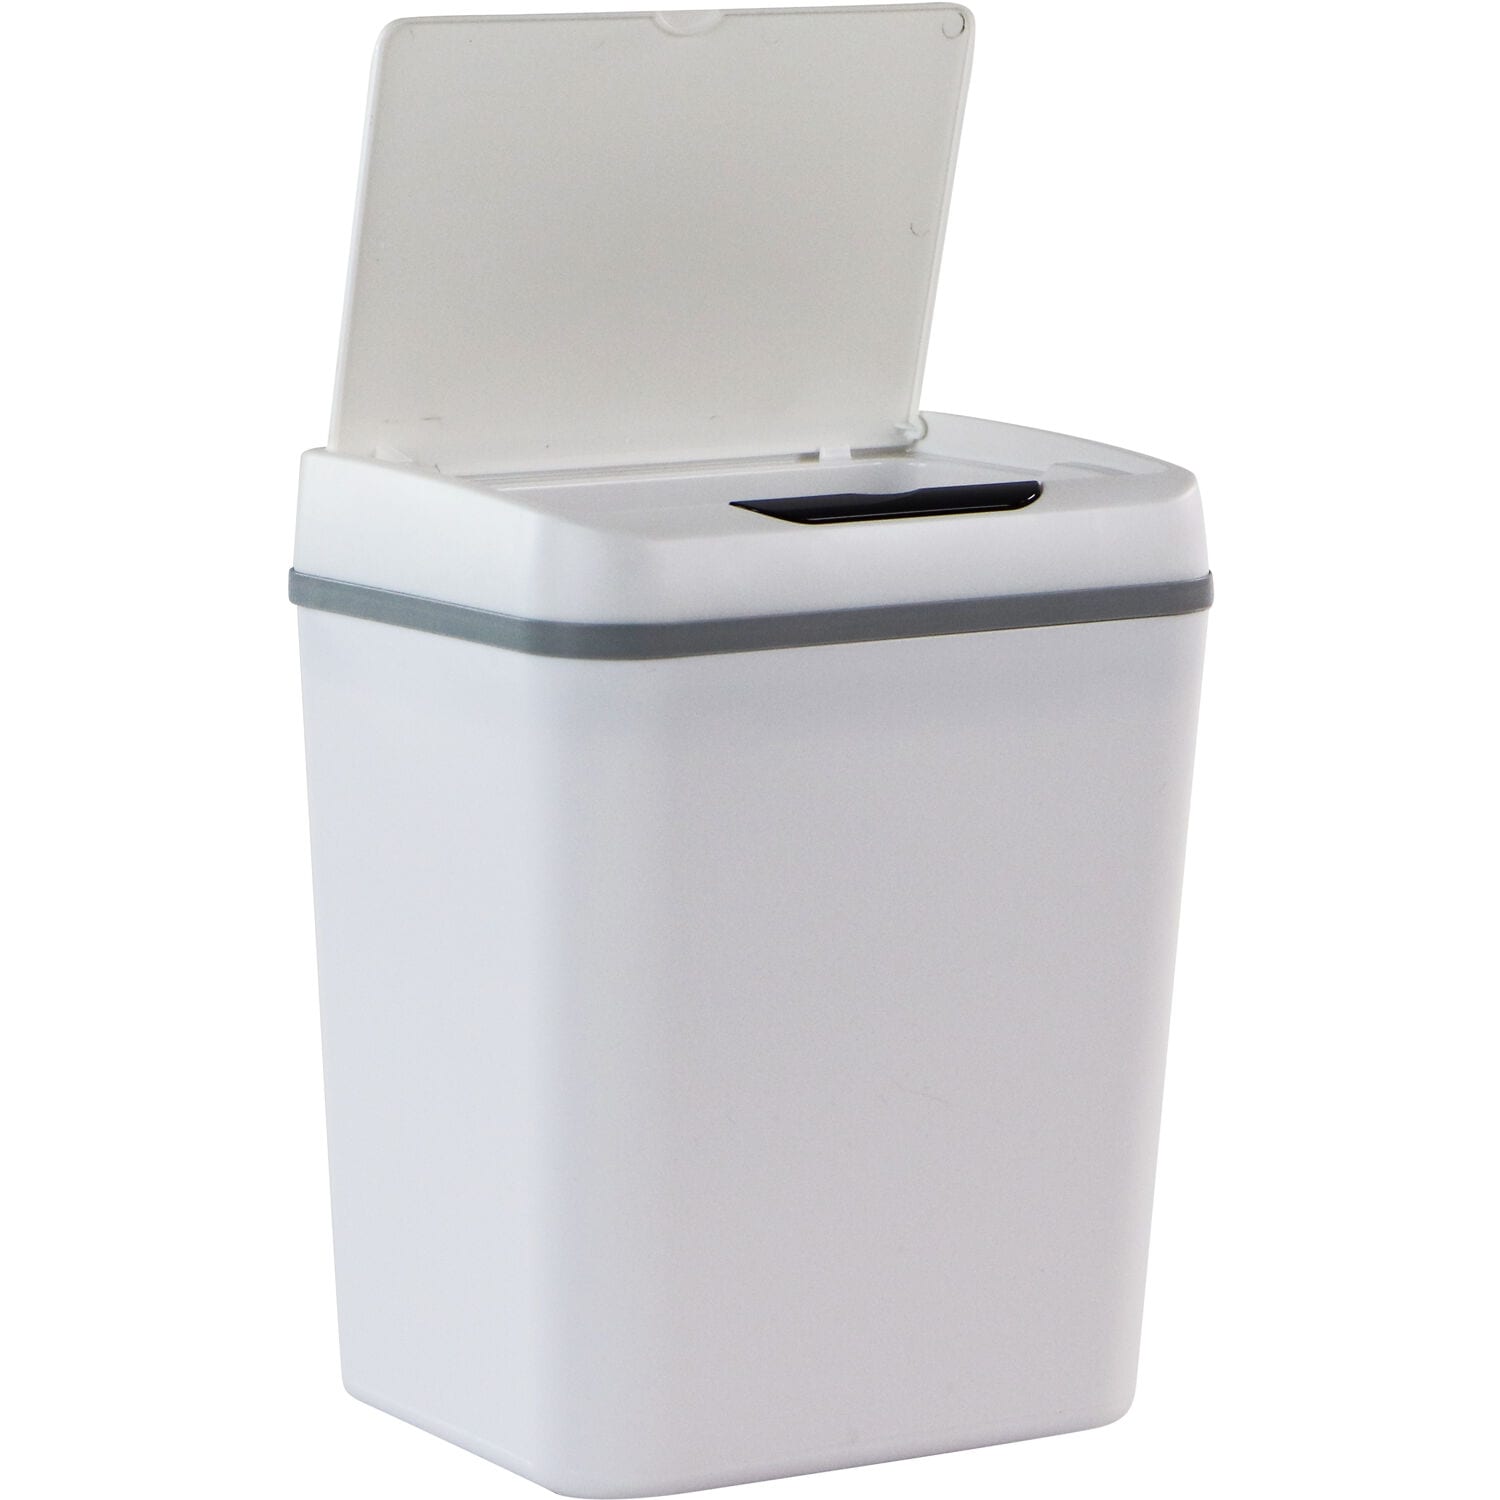 Hanover 12-Liter / 3.2-Gallon Trash Can with Sensor Lid in